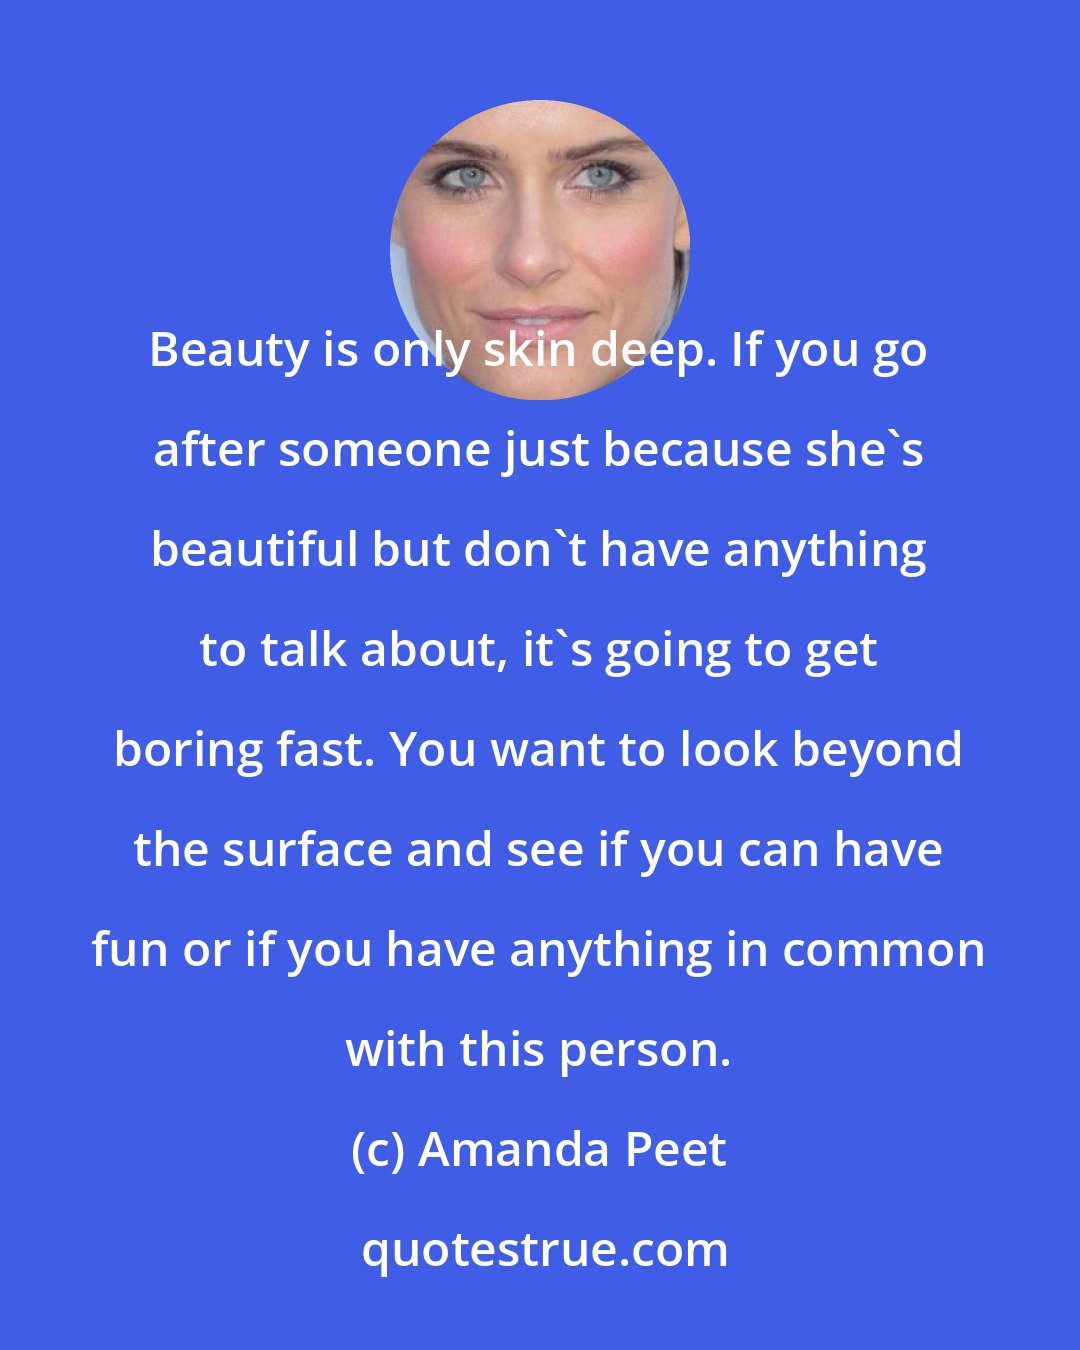 Amanda Peet: Beauty is only skin deep. If you go after someone just because she's beautiful but don't have anything to talk about, it's going to get boring fast. You want to look beyond the surface and see if you can have fun or if you have anything in common with this person.